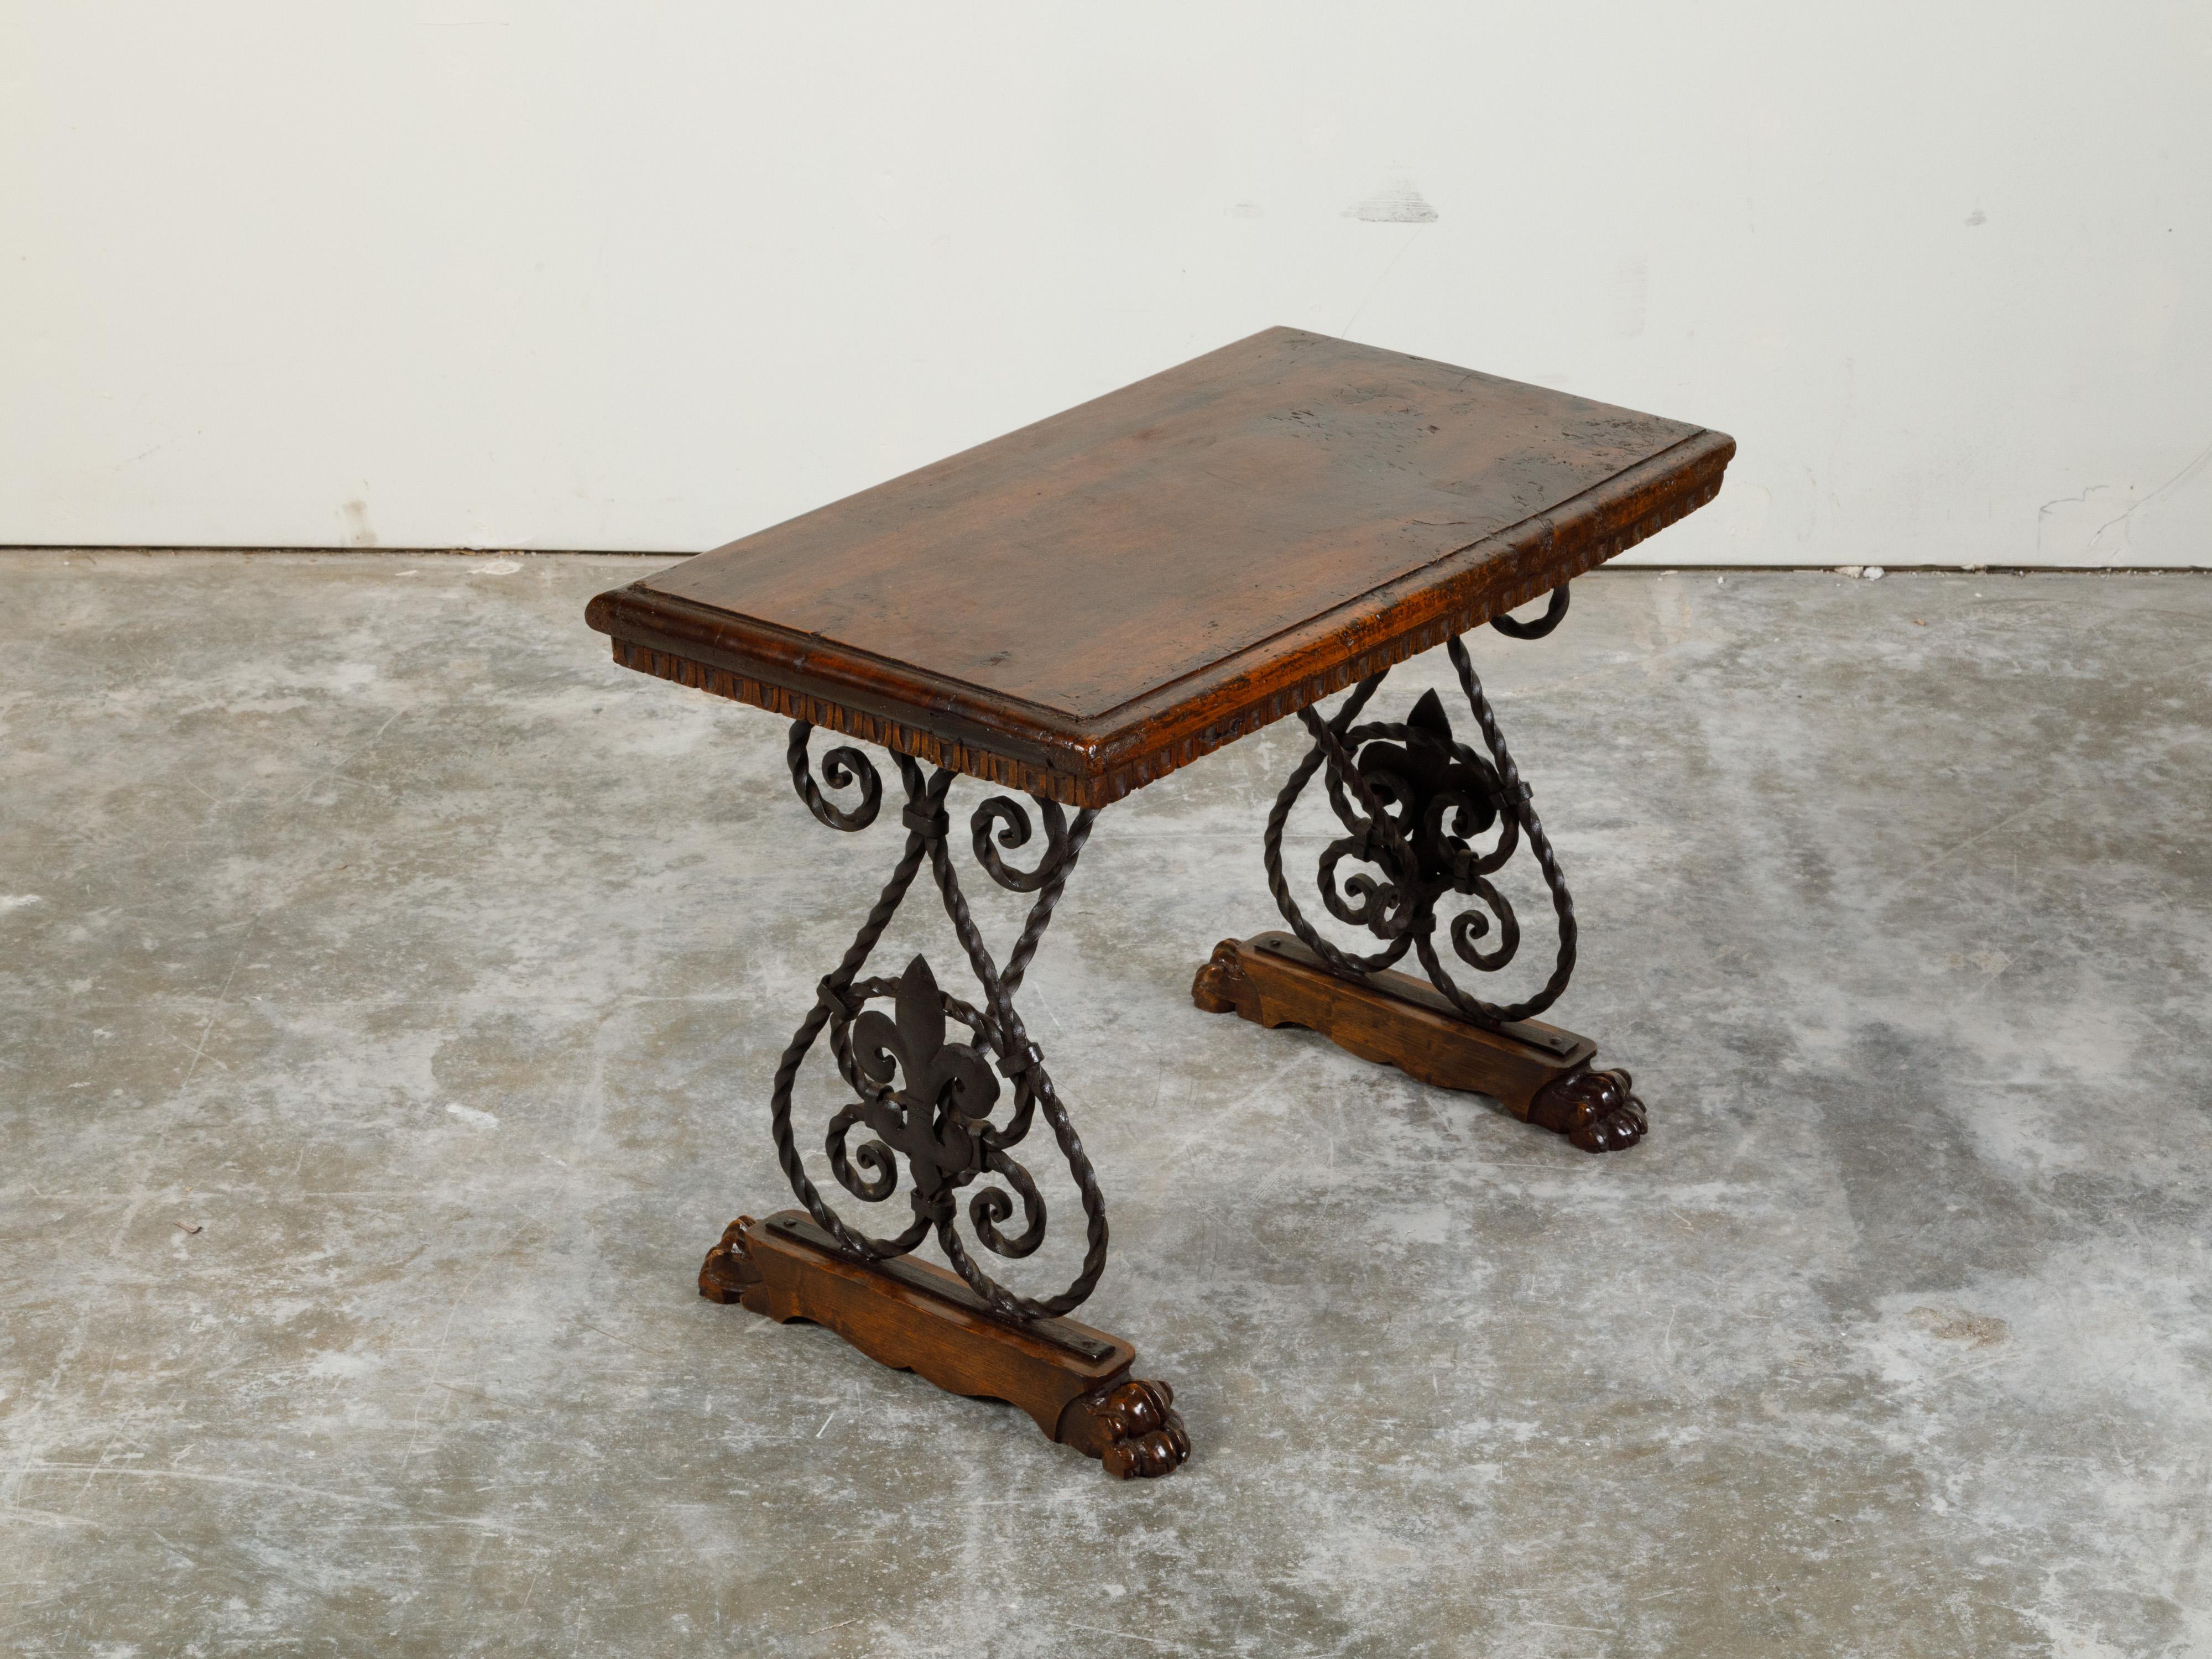 20th Century Italian 1900s Walnut Top Console Table with Iron Base and Fleur de Lys Motifs For Sale